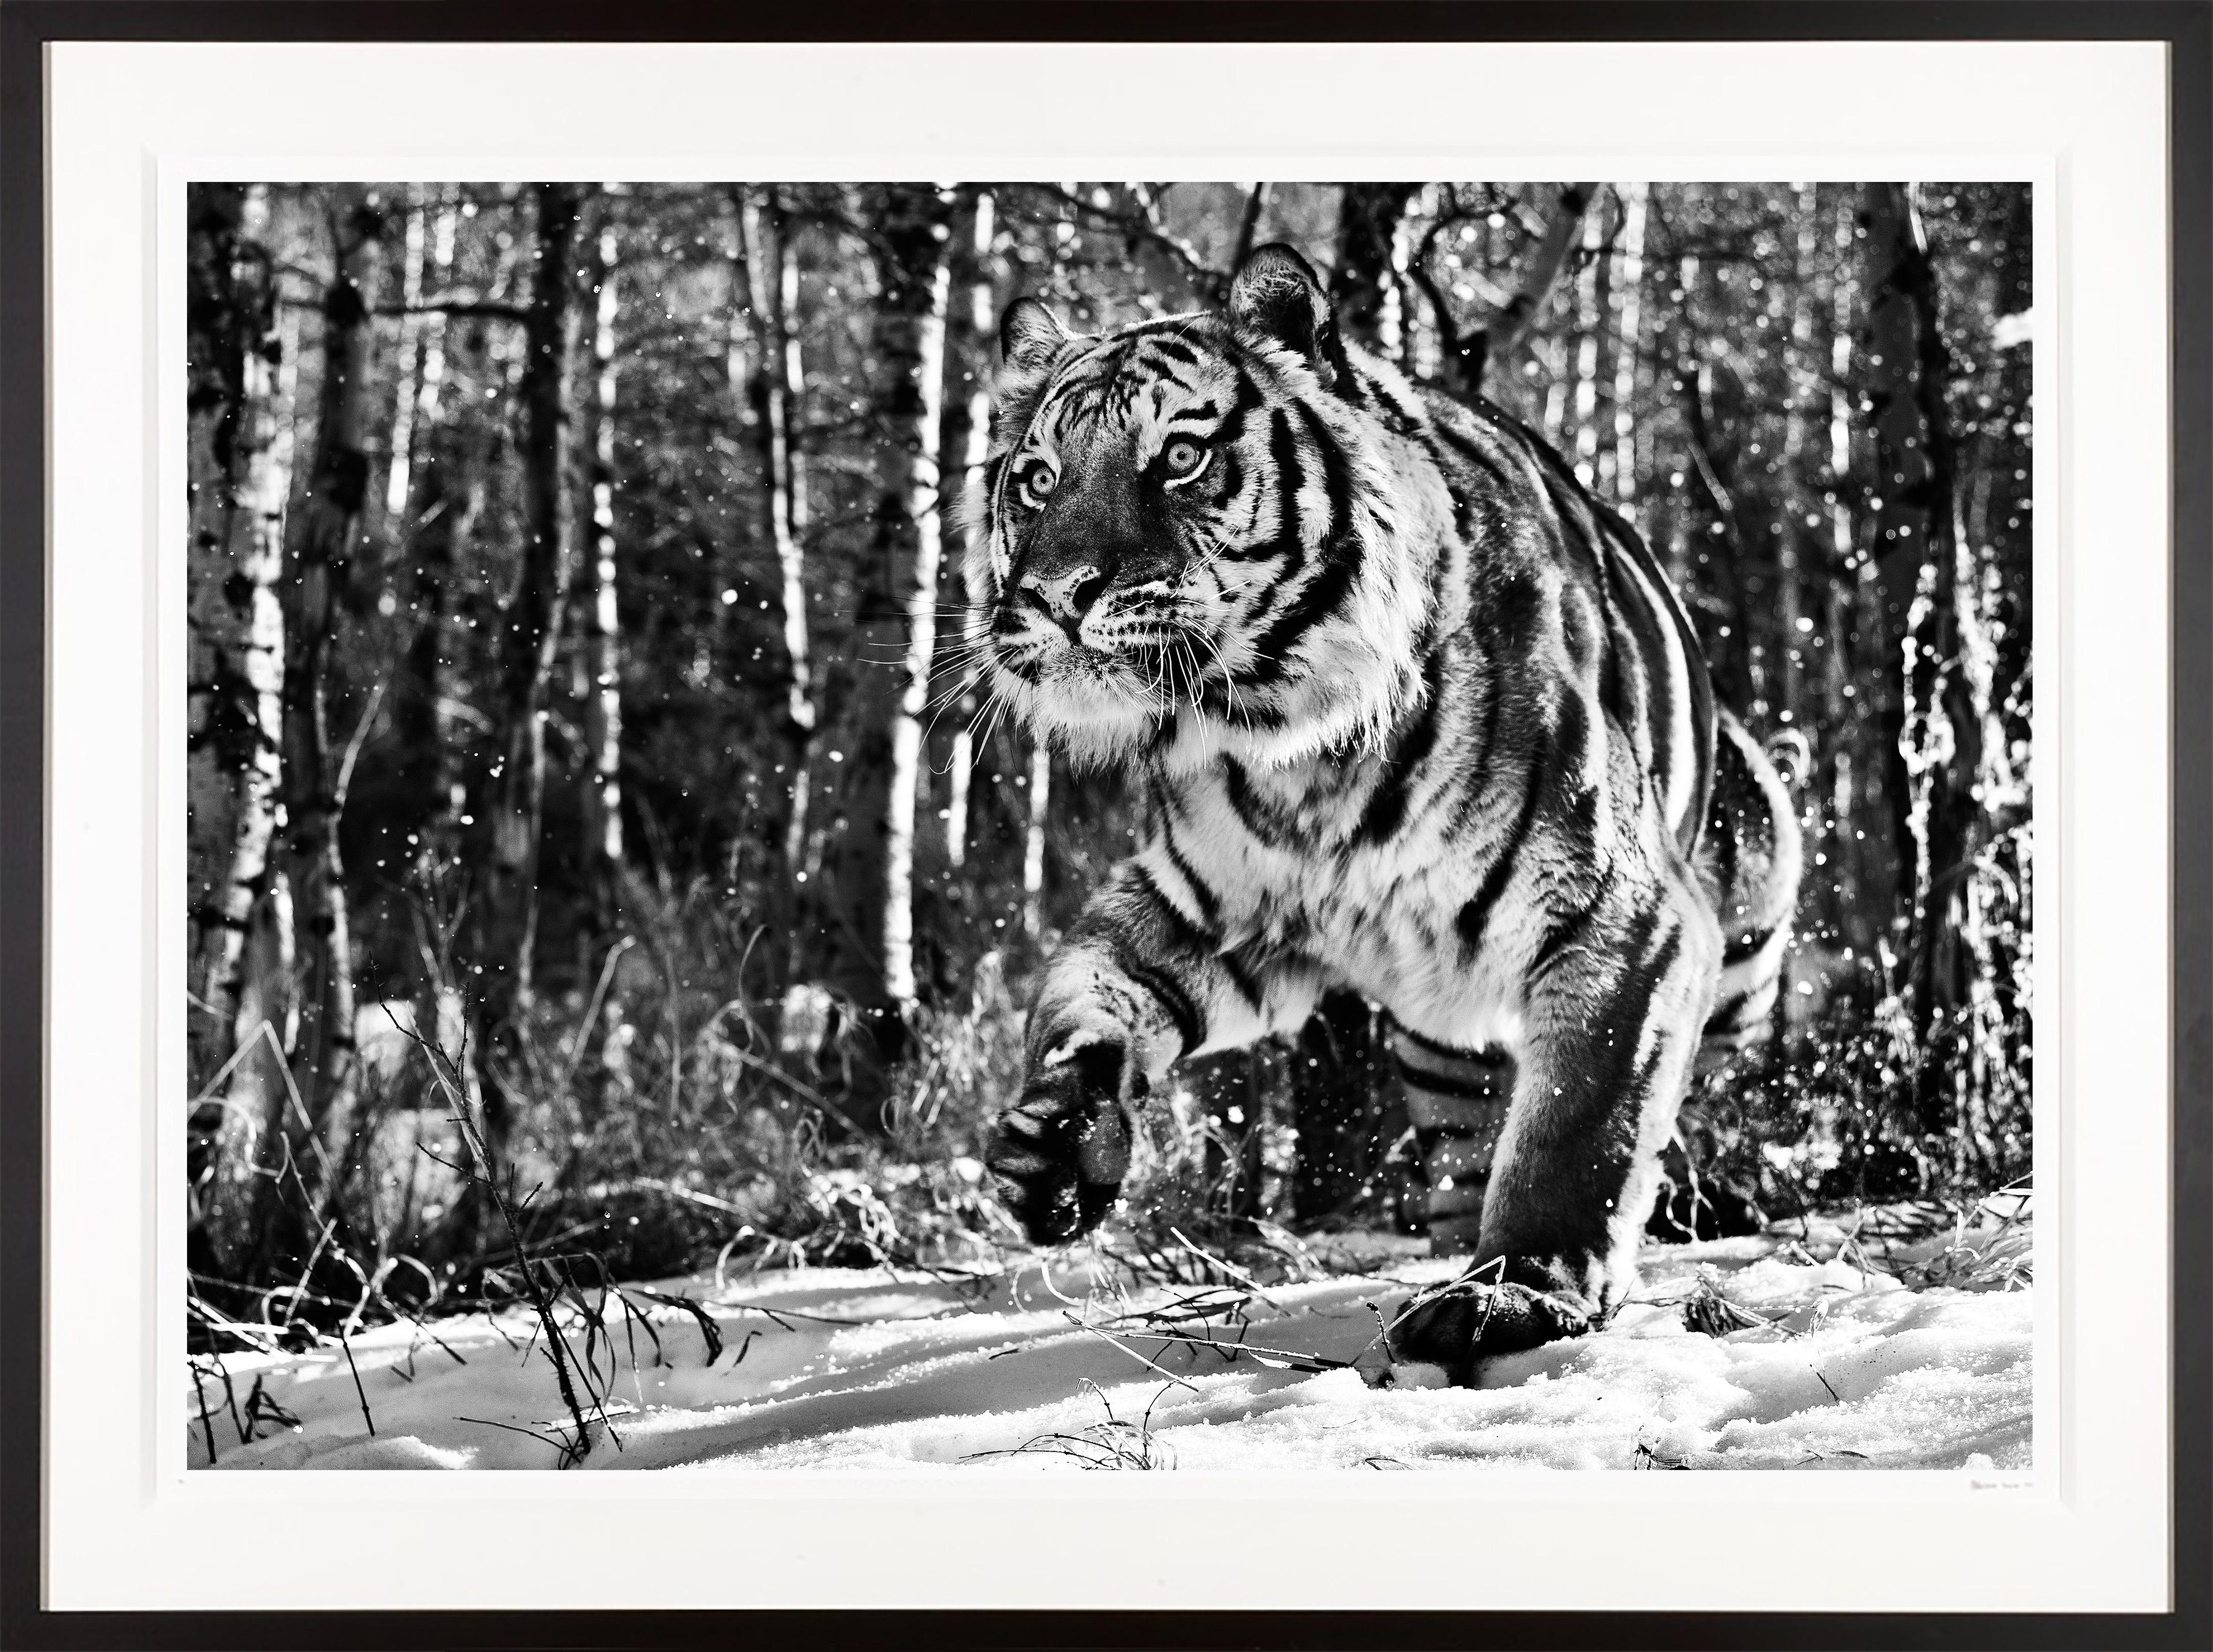 David Yarrow Landscape Photograph - "Cold Mountain" Siberian Tiger Framed Black and White Photograph